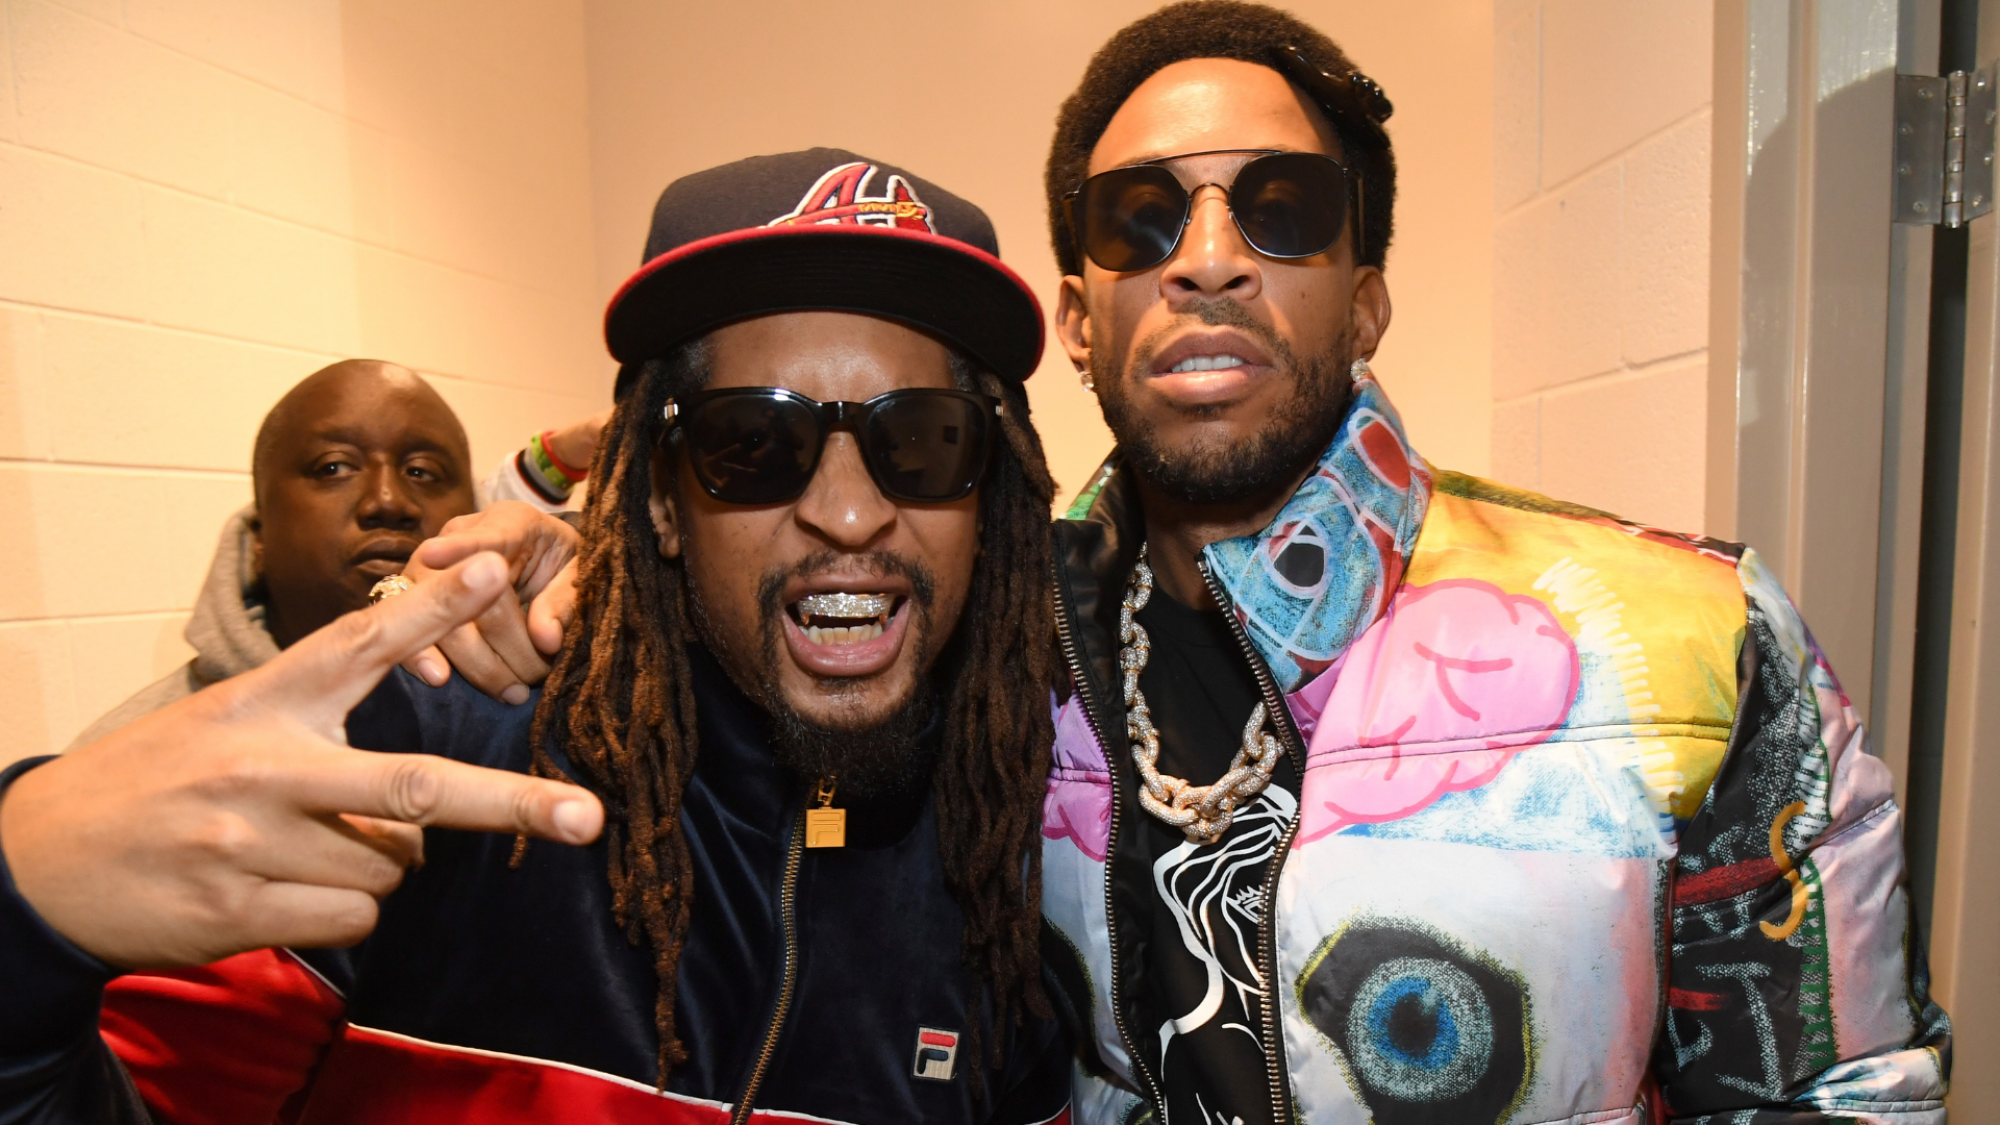 Lil Jon, making a peace sign, and Ludacris